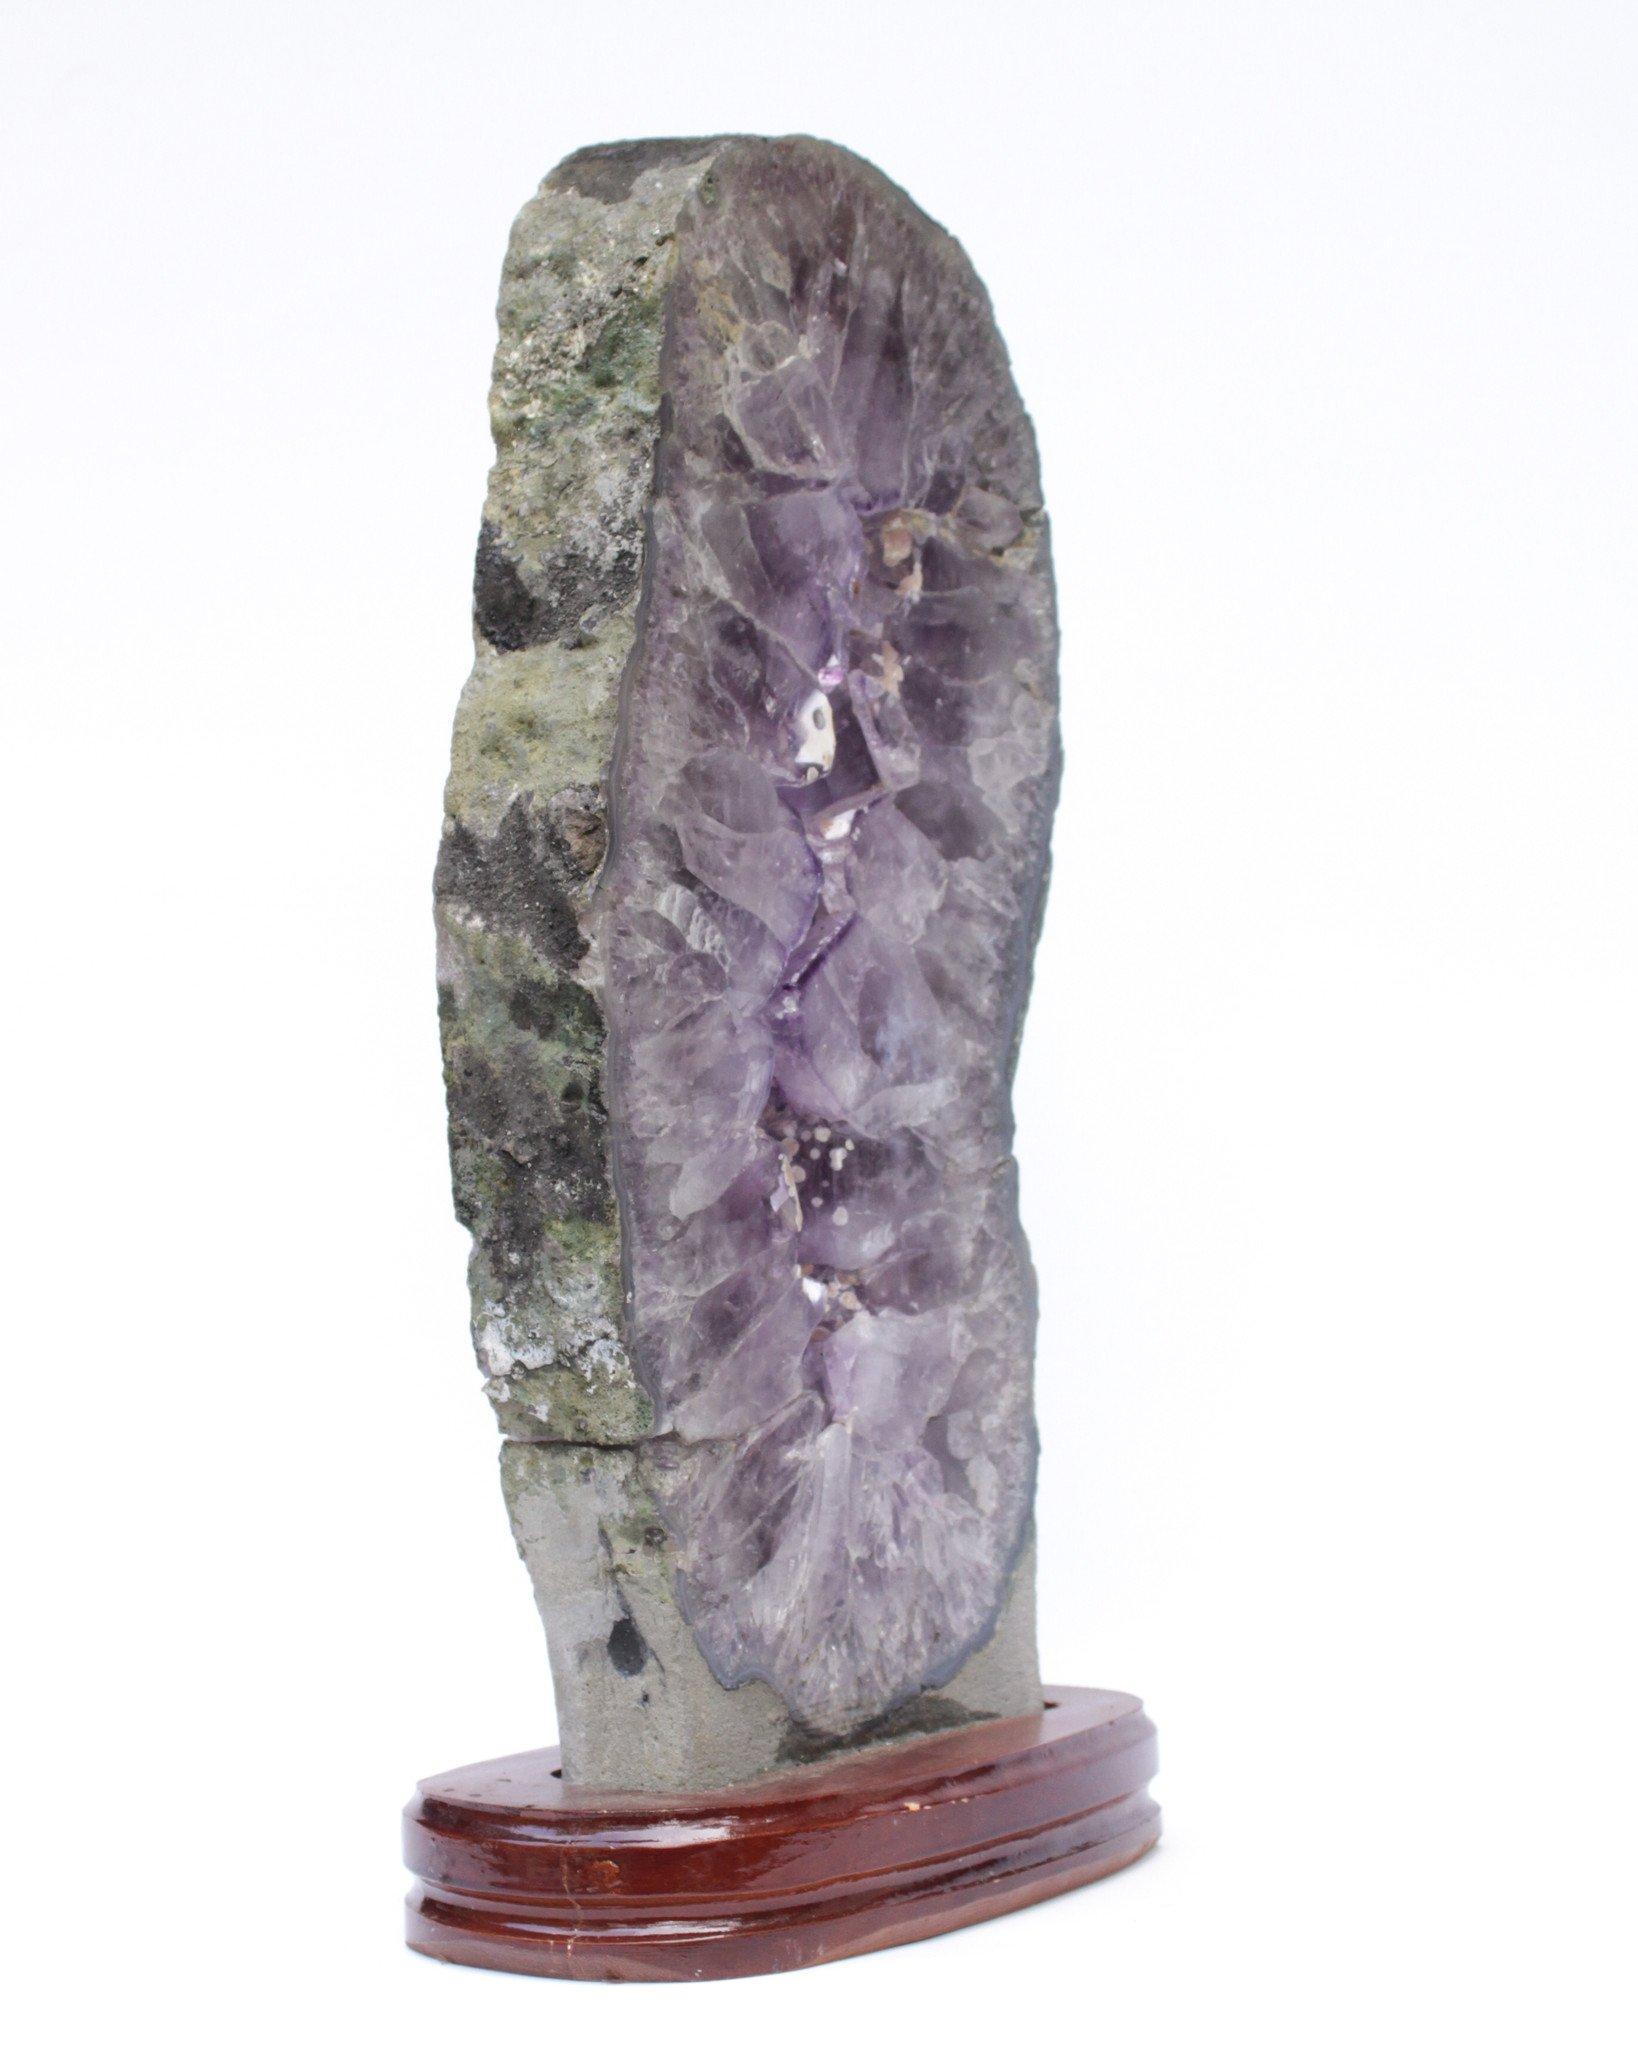 Organic Modern Amethyst Slice with Calcite Deposits and a Baroque Pearl on a Polished Wood Base For Sale